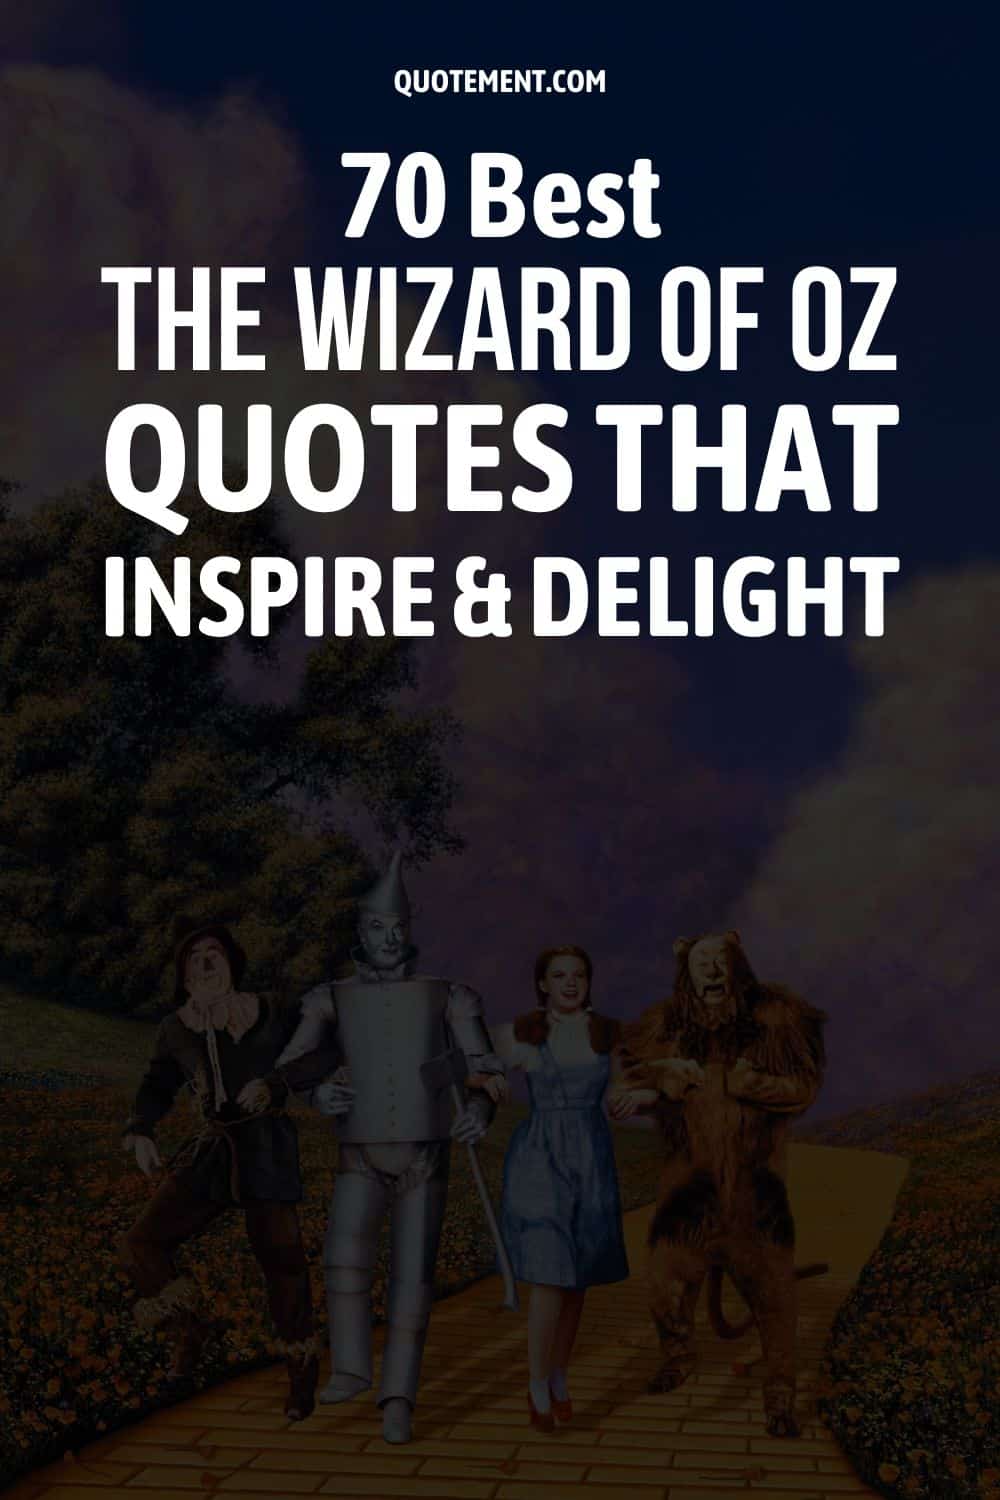 70 Best The Wizard Of Oz Quotes That Inspire And Delight
